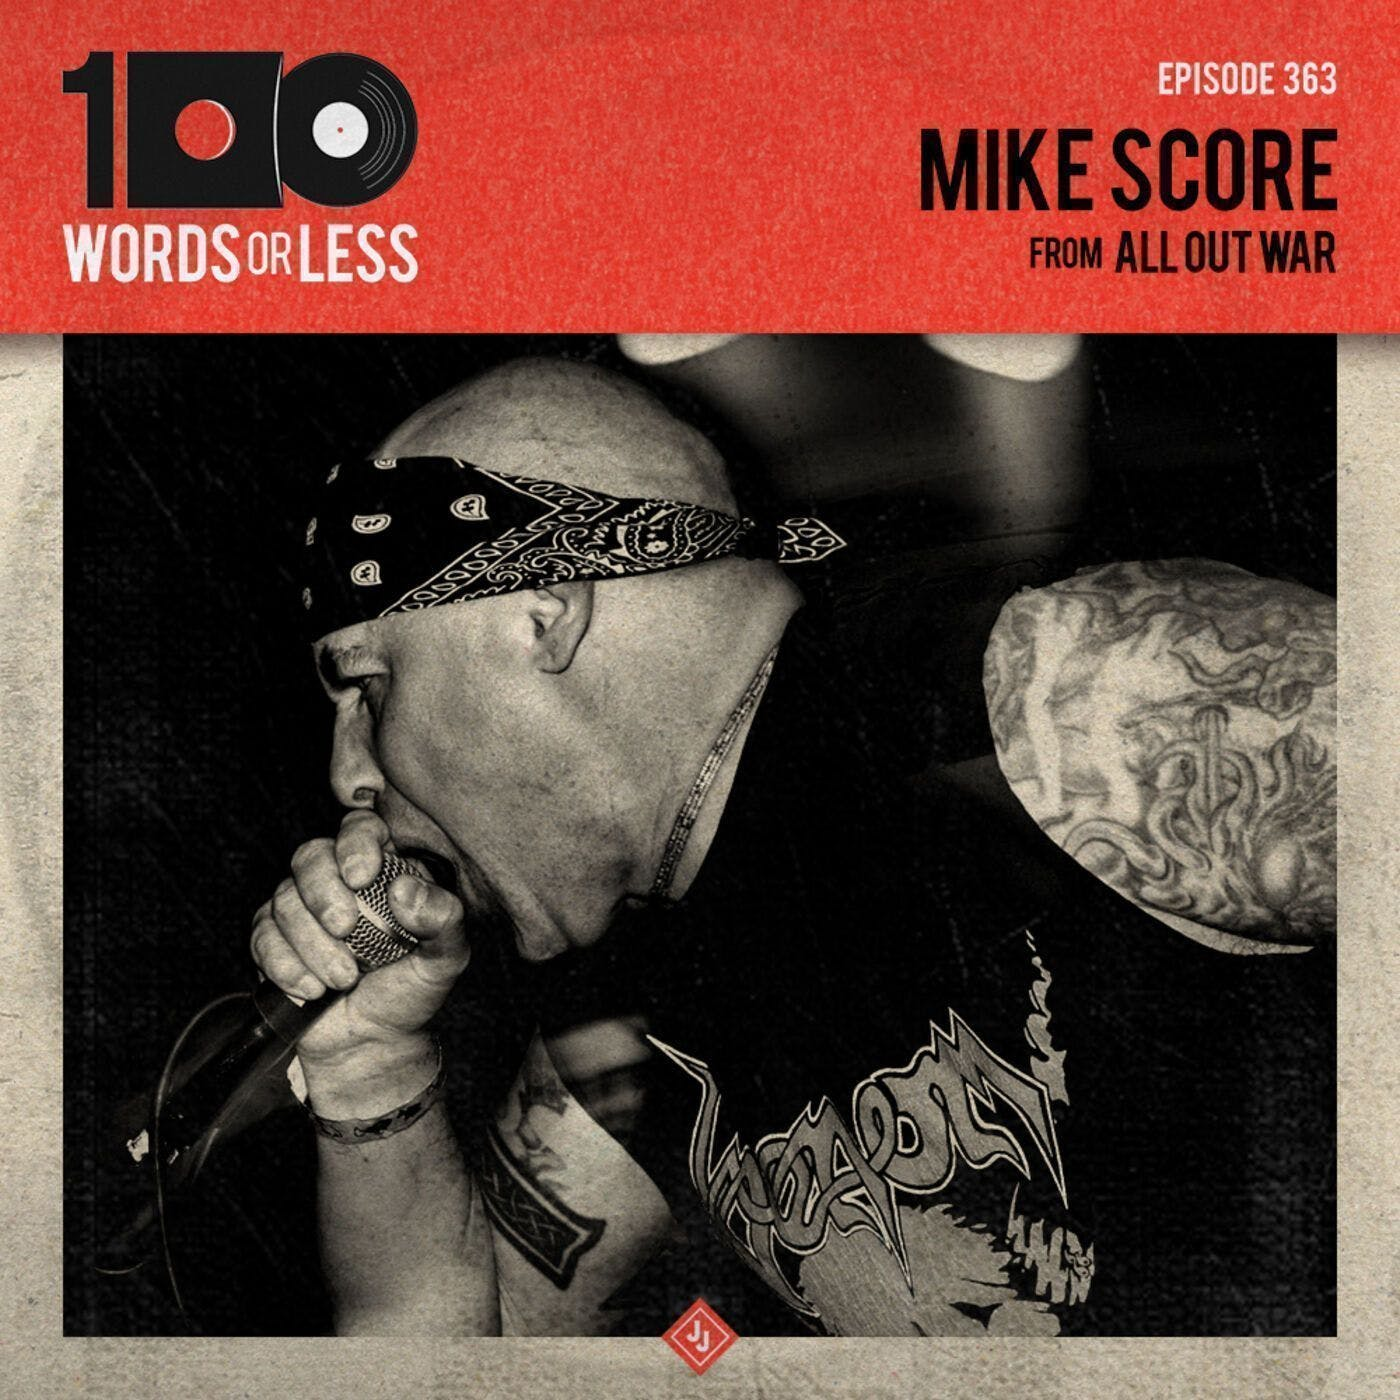 Mike Score from All Out War